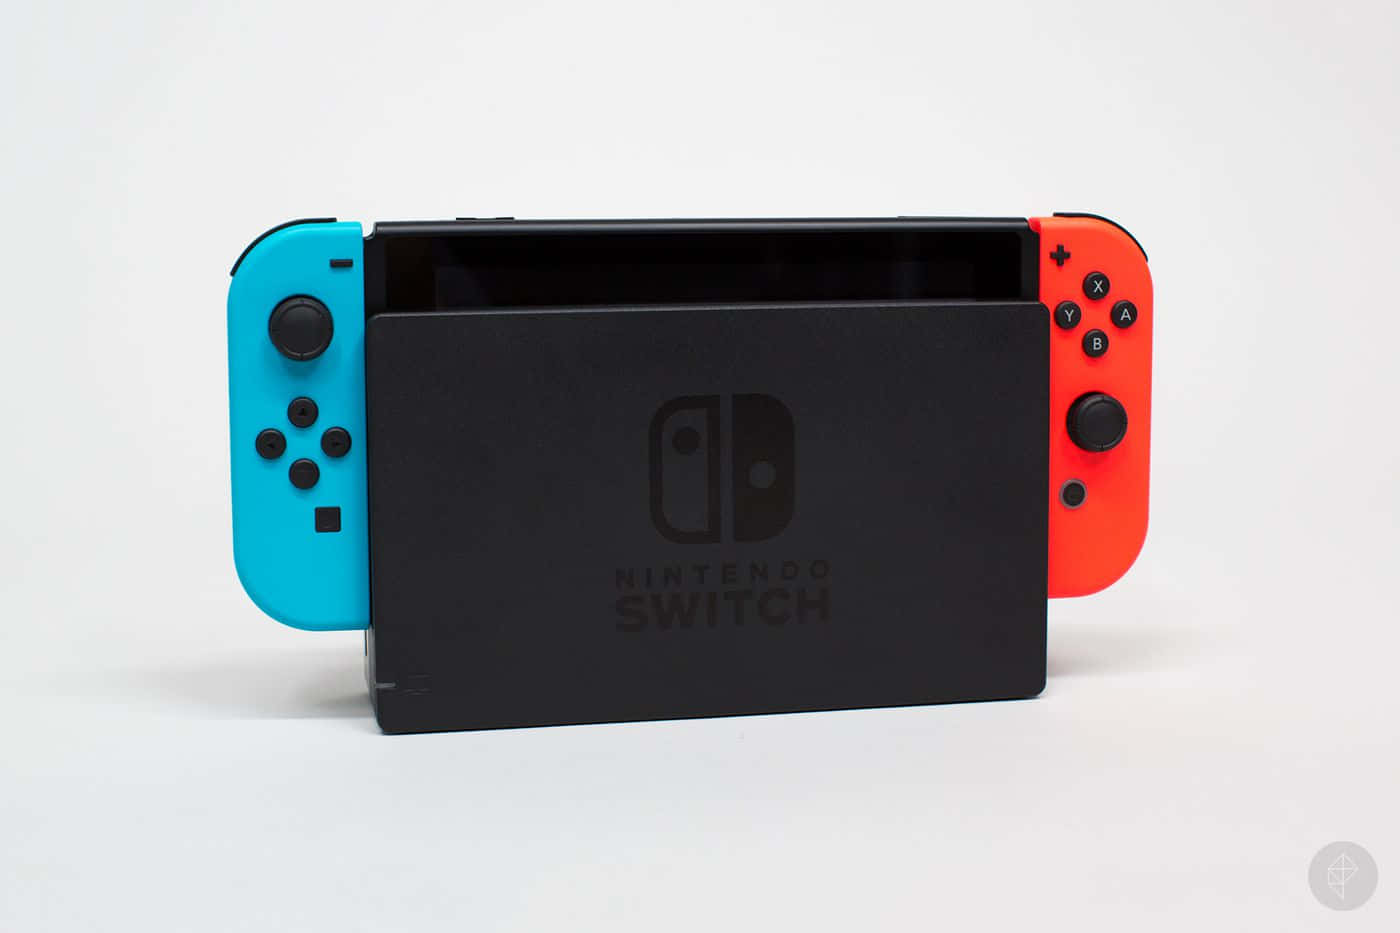 Experience the new generation of gaming with the Nintendo Switch.